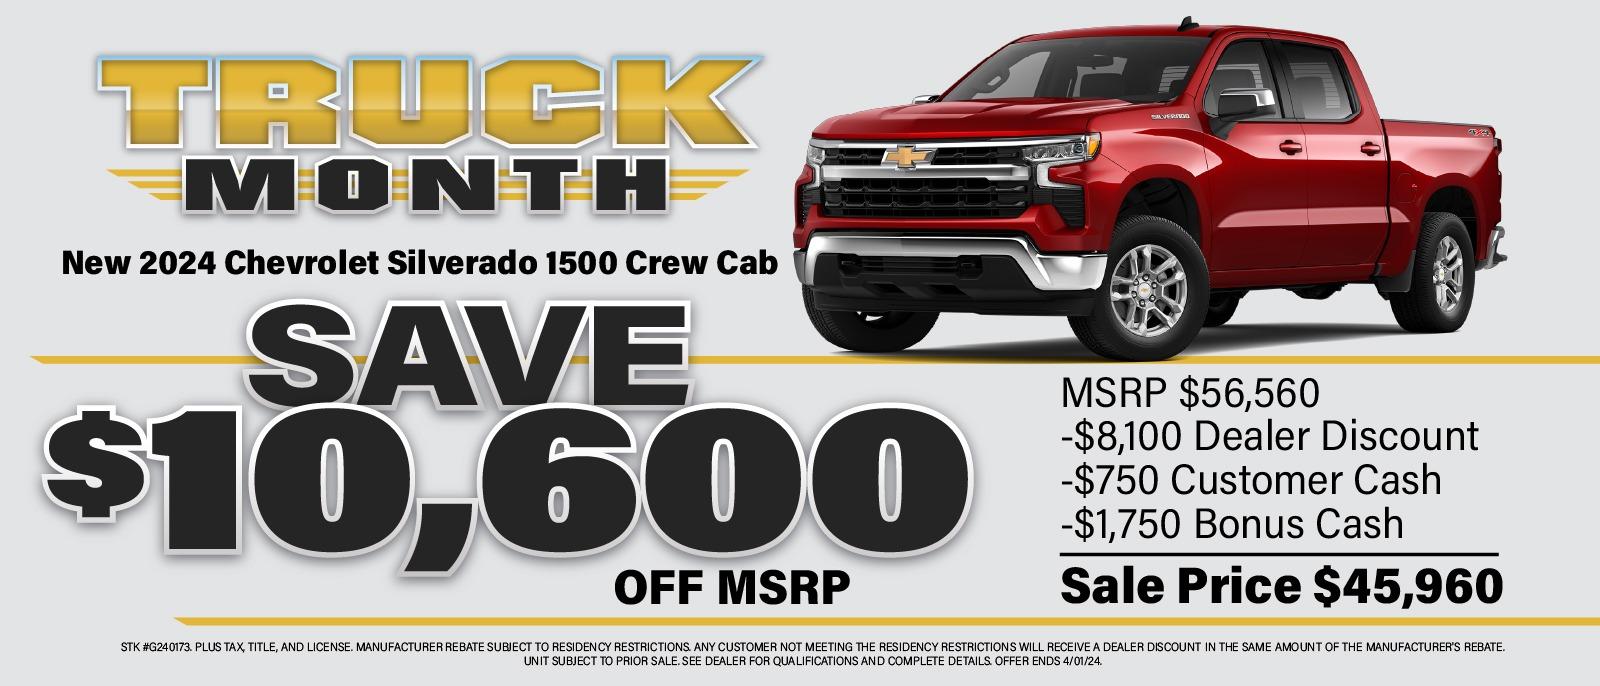 CHEVY TRUCK MONTH OFFER!